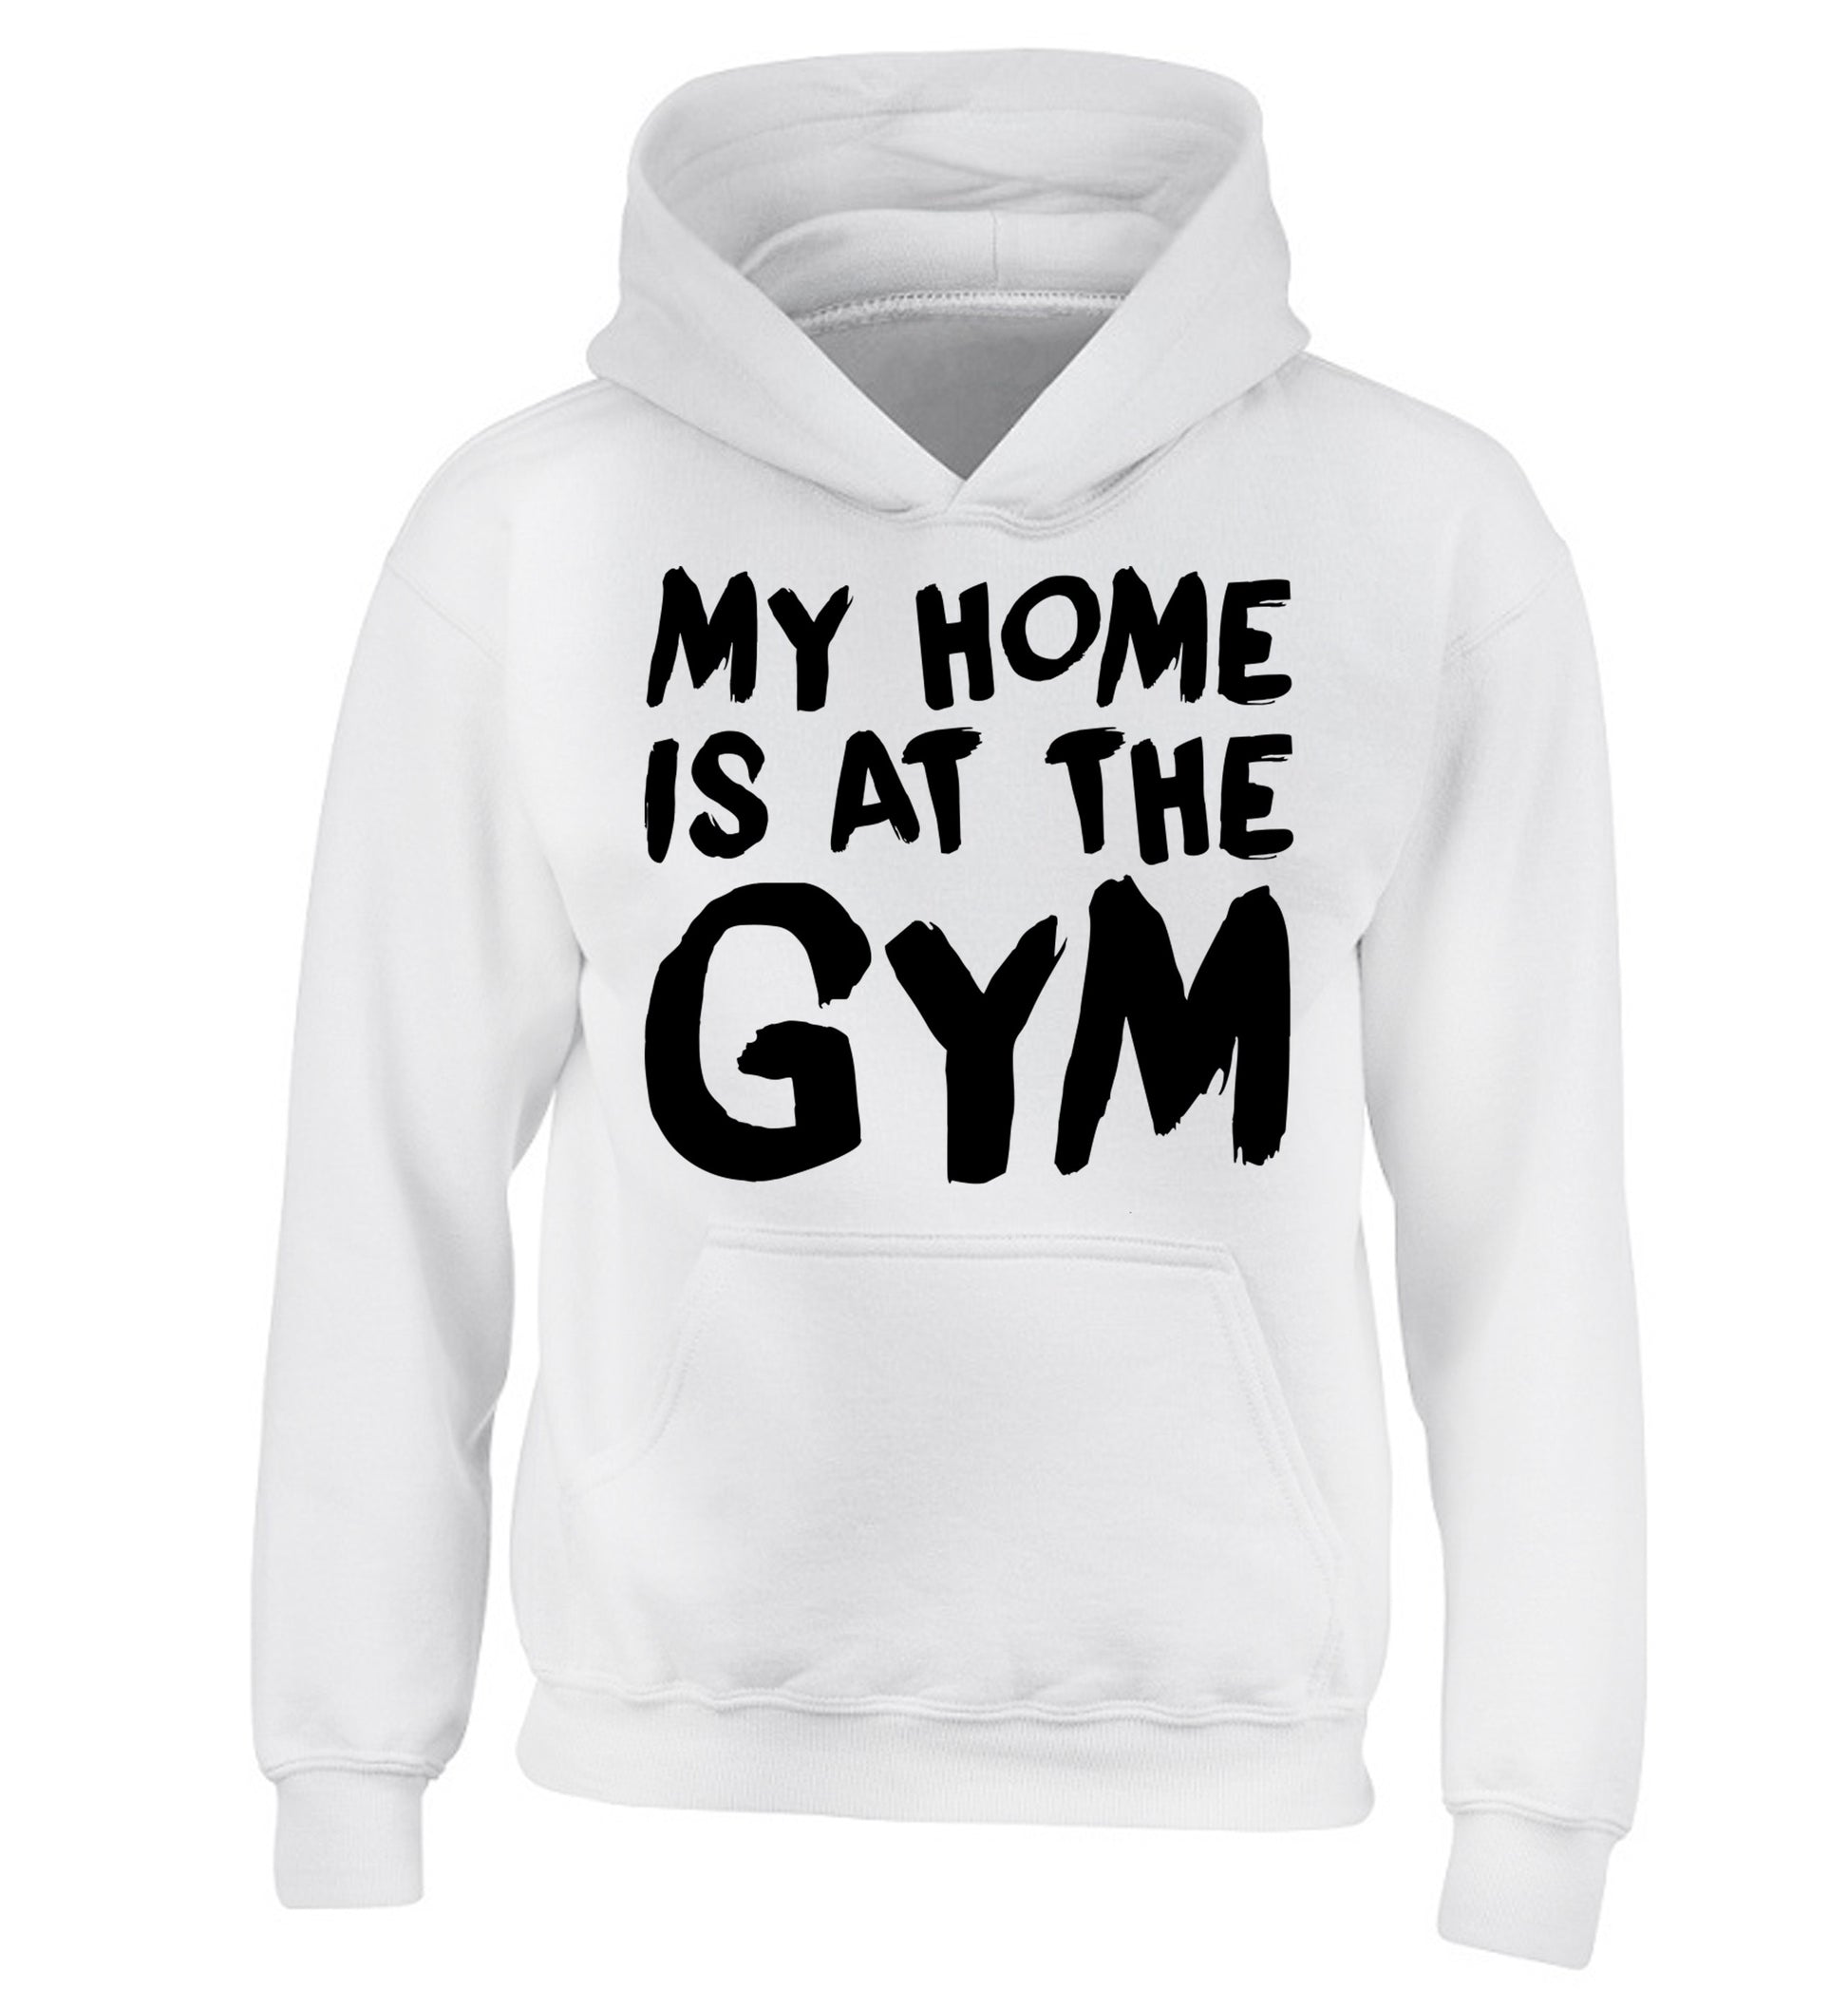 My home is at the gym children's white hoodie 12-14 Years